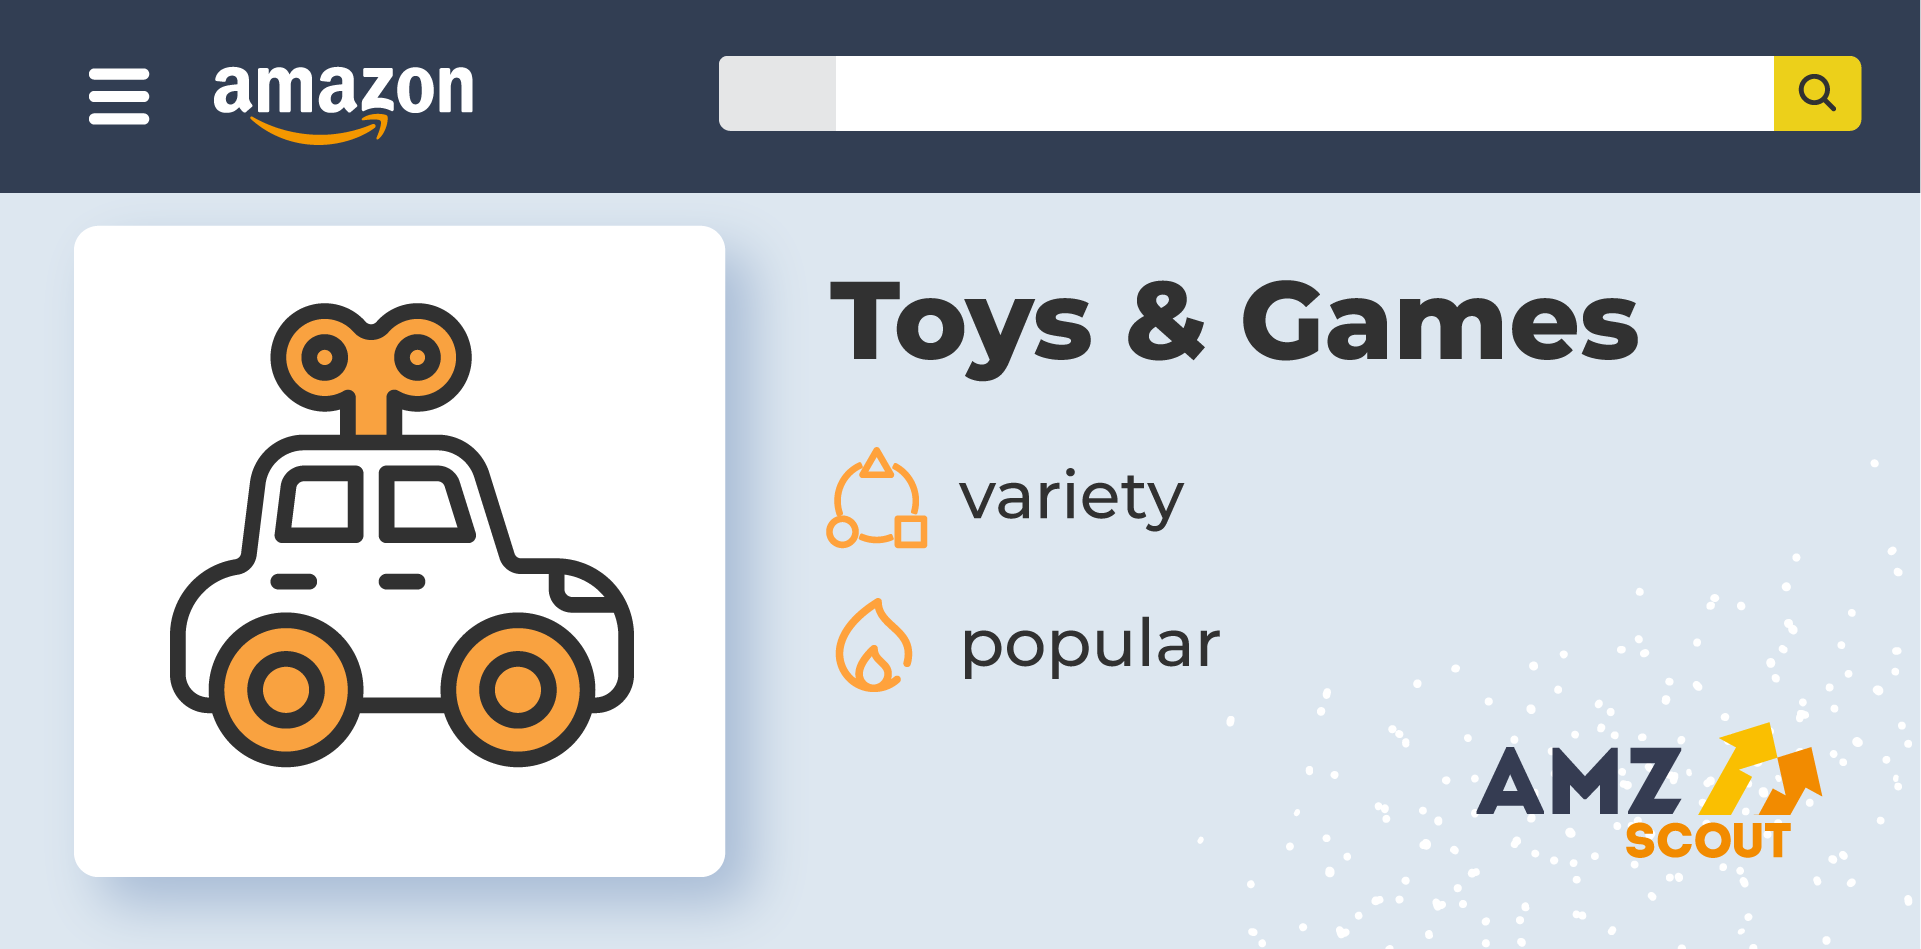 Toys & games - top selling products on amazon #2